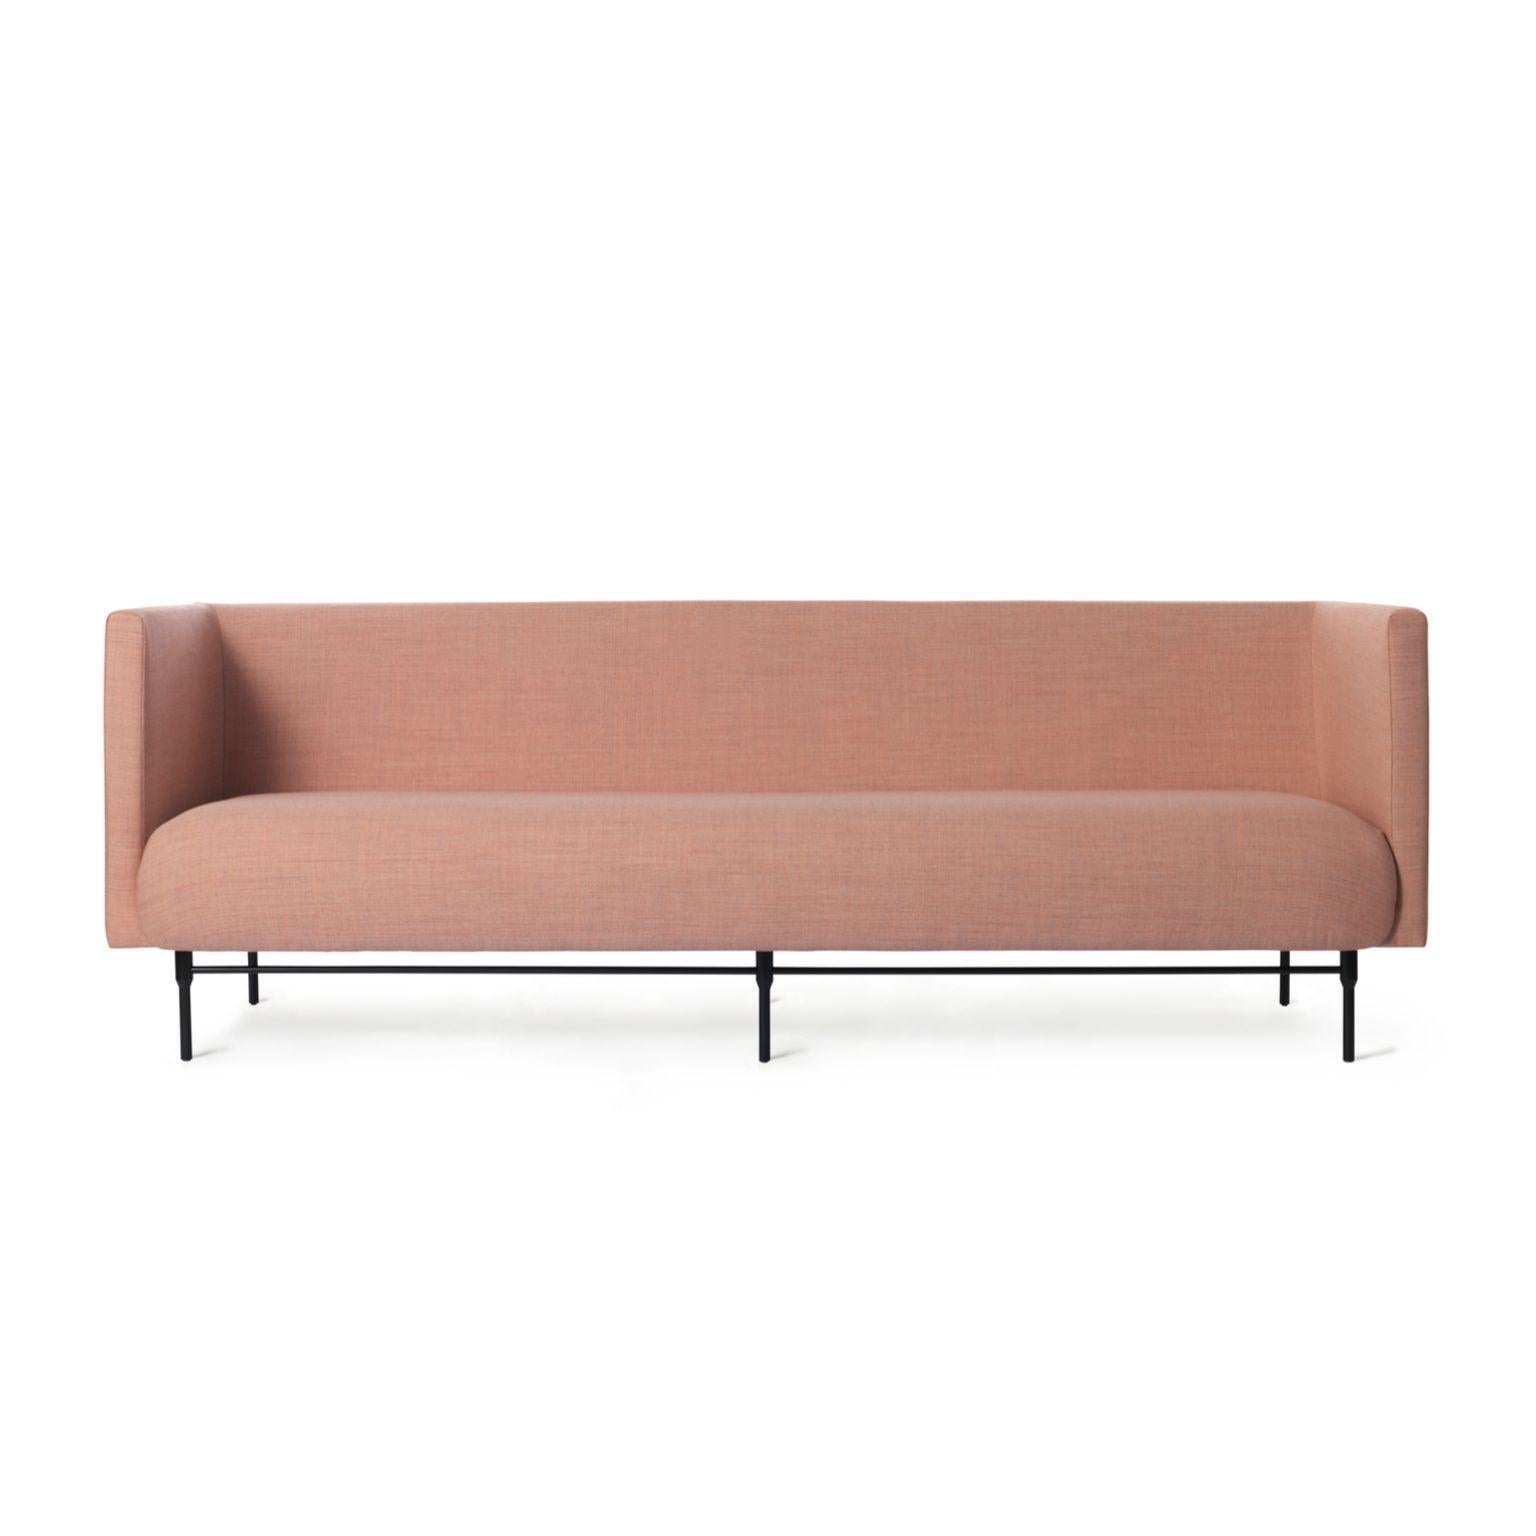 Galore 3 Seater Pale Rose by Warm Nordic
Dimensions: D222 x W83 x H 76 cm
Material: Textile upholstery, Powder coated black steel legs, Wooden frame, foam, spring system.
Weight: 62 kg
Also available in different colours and finishes. Please